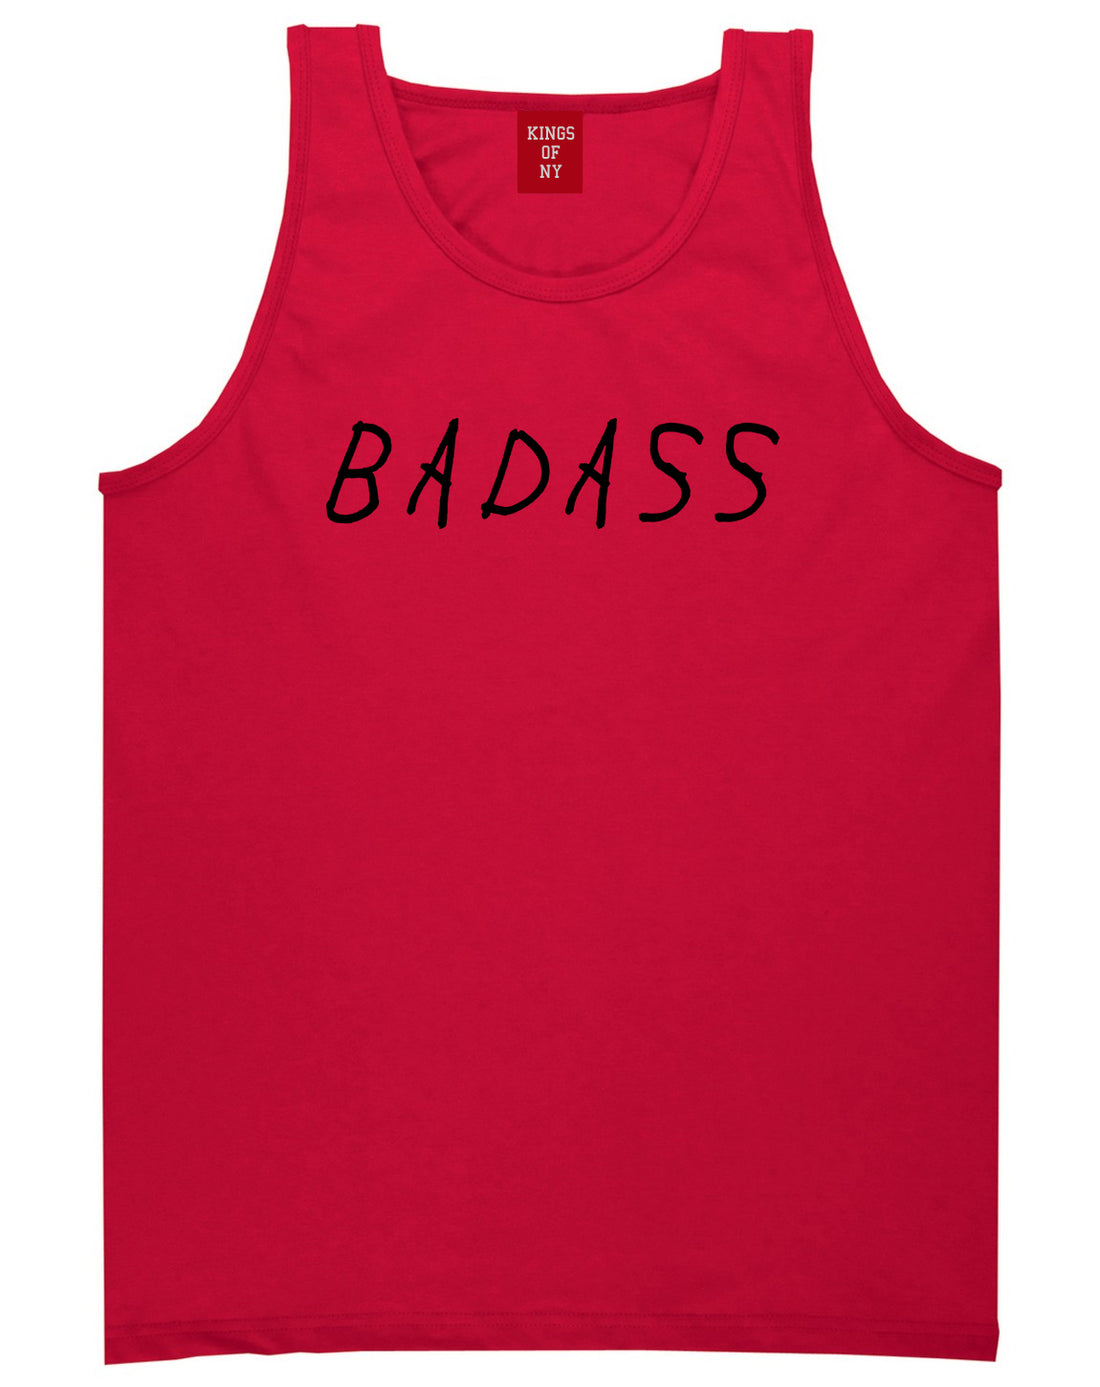 Badass Red Tank Top Shirt by Kings Of NY